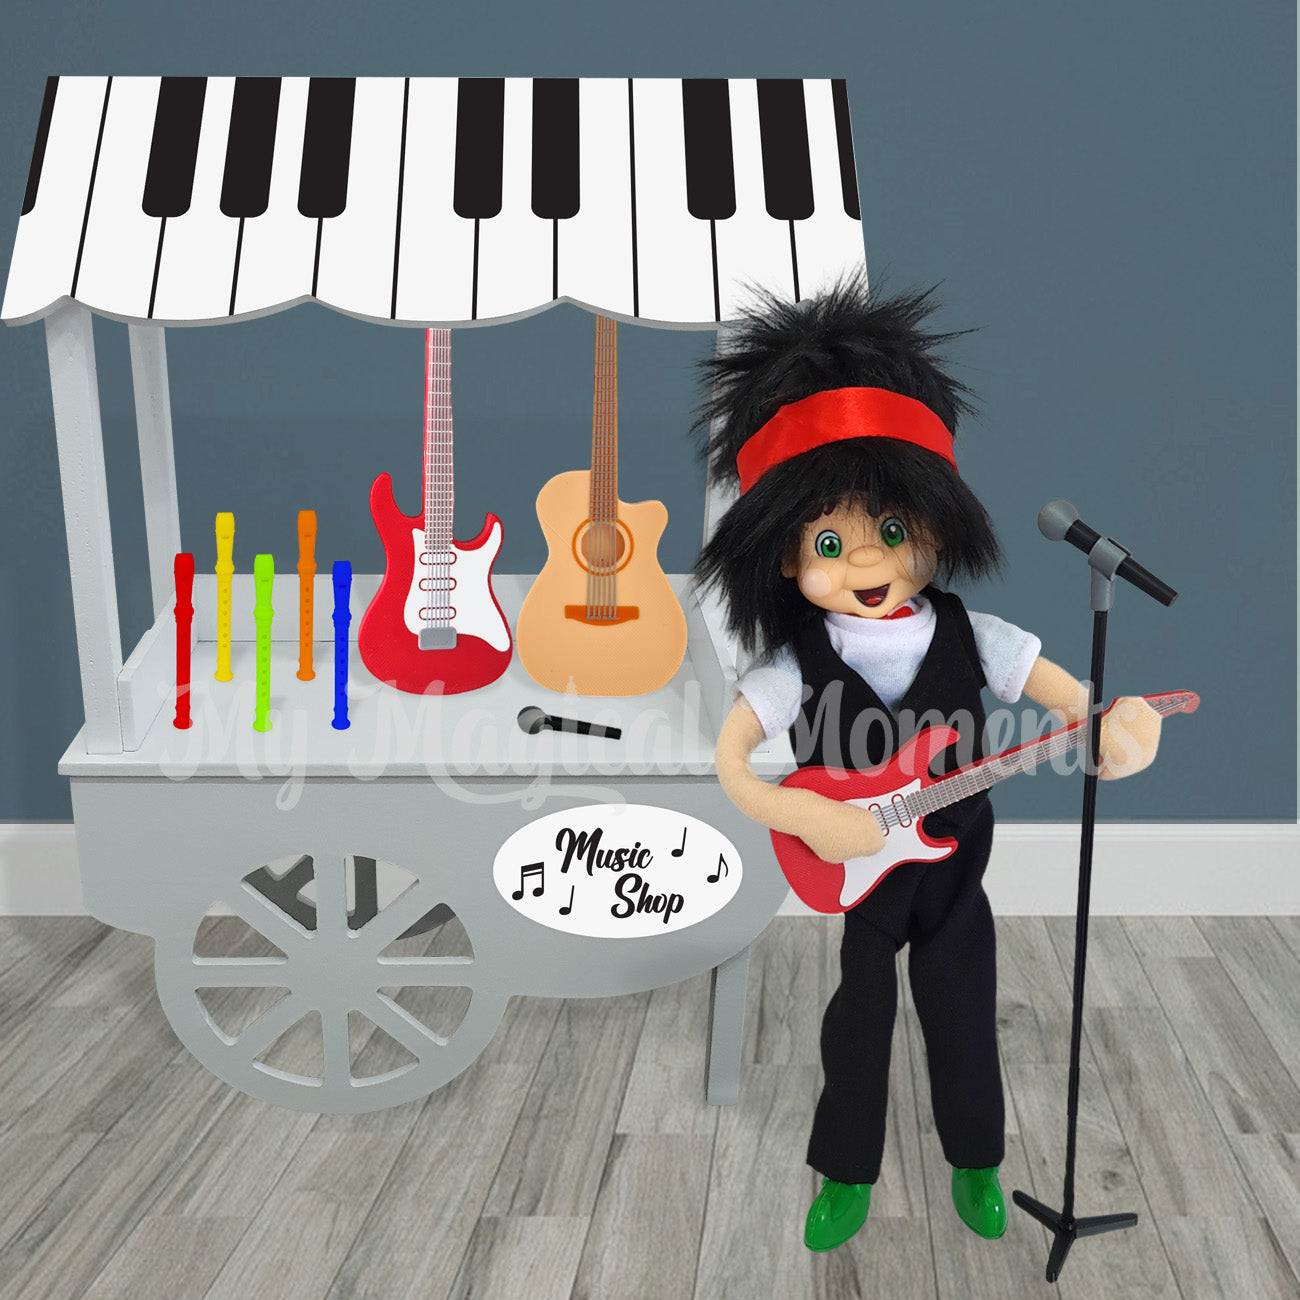 Elf dressed as a rockstar selling instruments from his miniature music shop. He is playing a miniature electric guitar